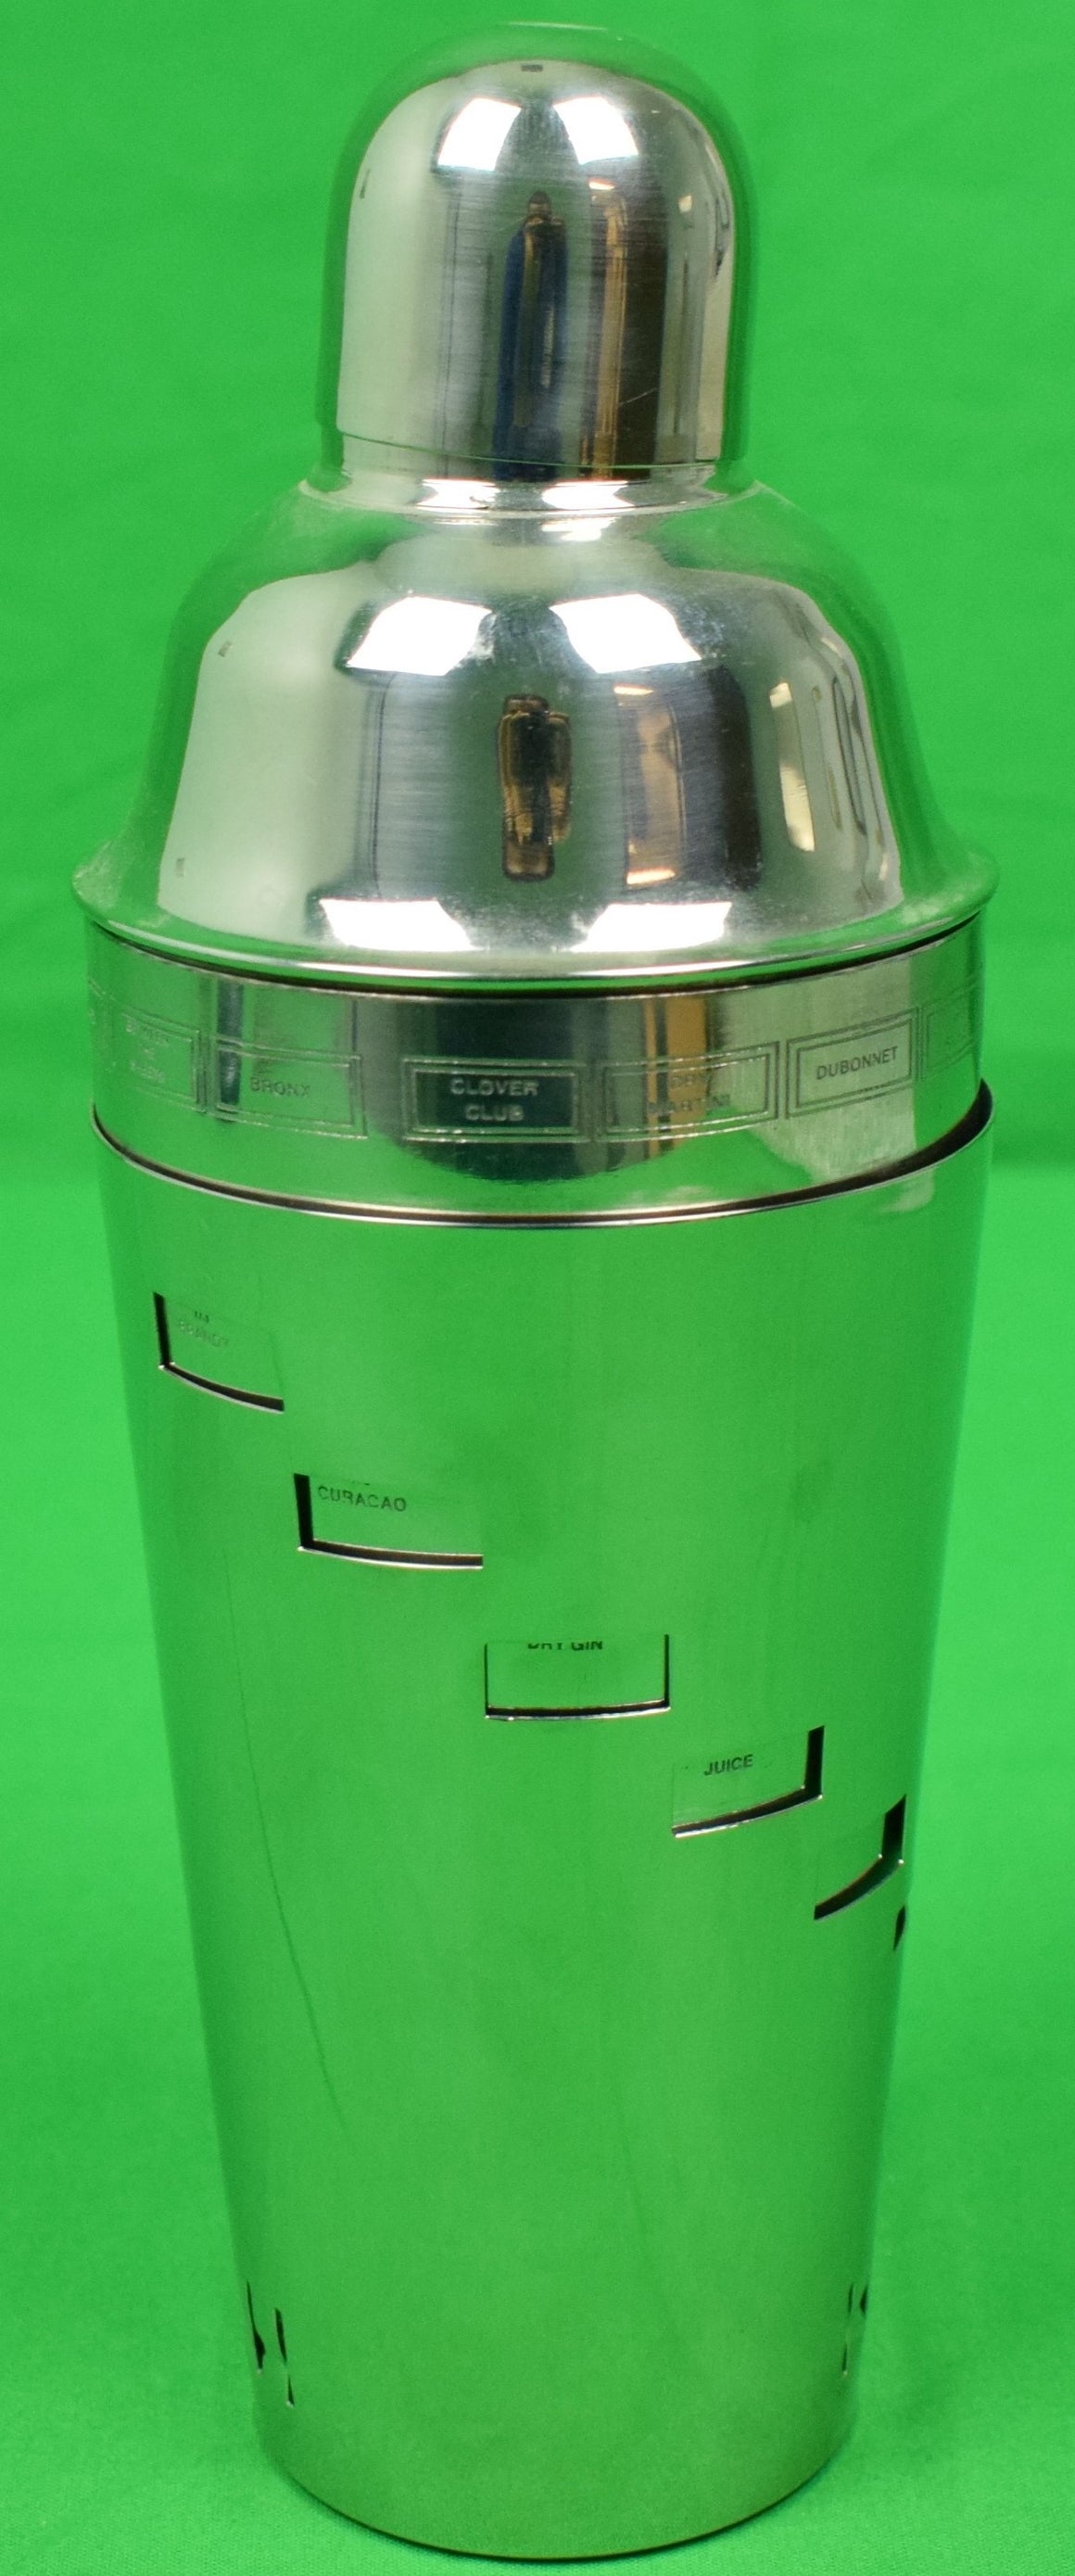 "Stainless Steel Cocktail Shaker w/ 15 Sliding 'Dial-A-Drink' Recipes"